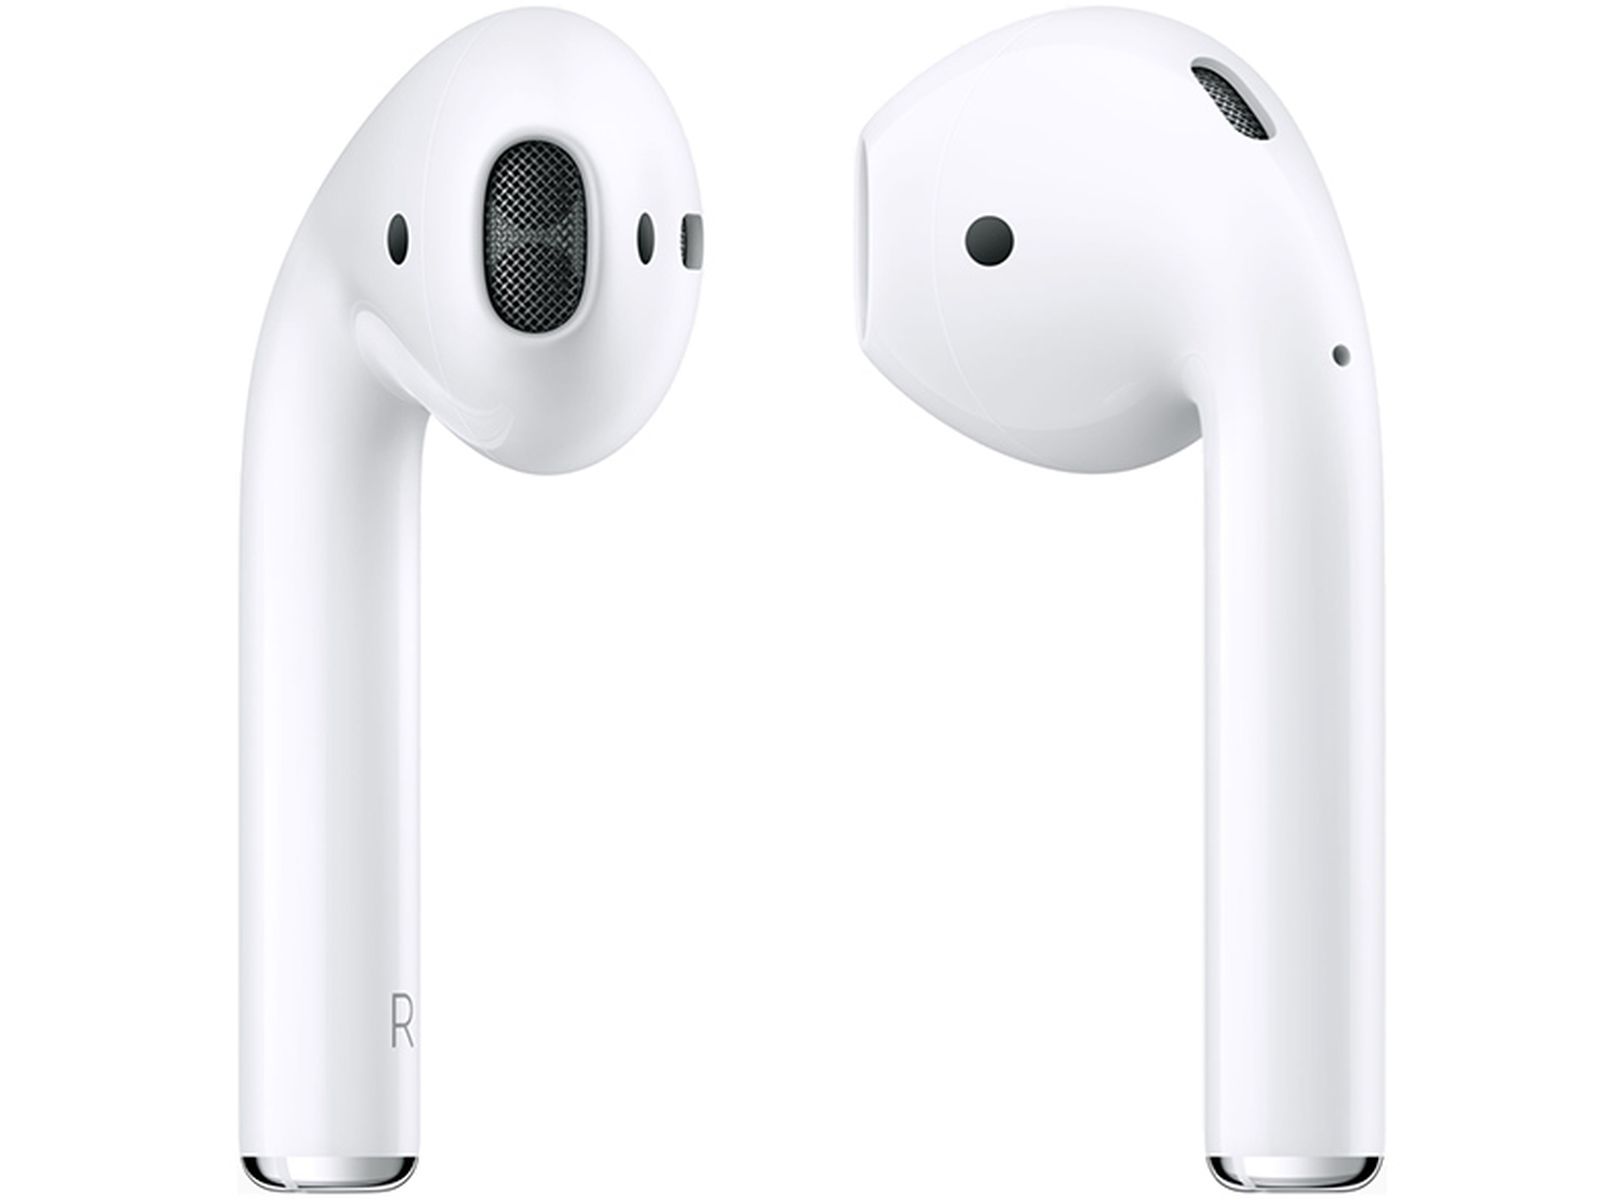 frugthave Ananiver Outlaw Apple Sending Replacement AirPods With Unreleased Firmware, Rendering Them  Unusable - MacRumors